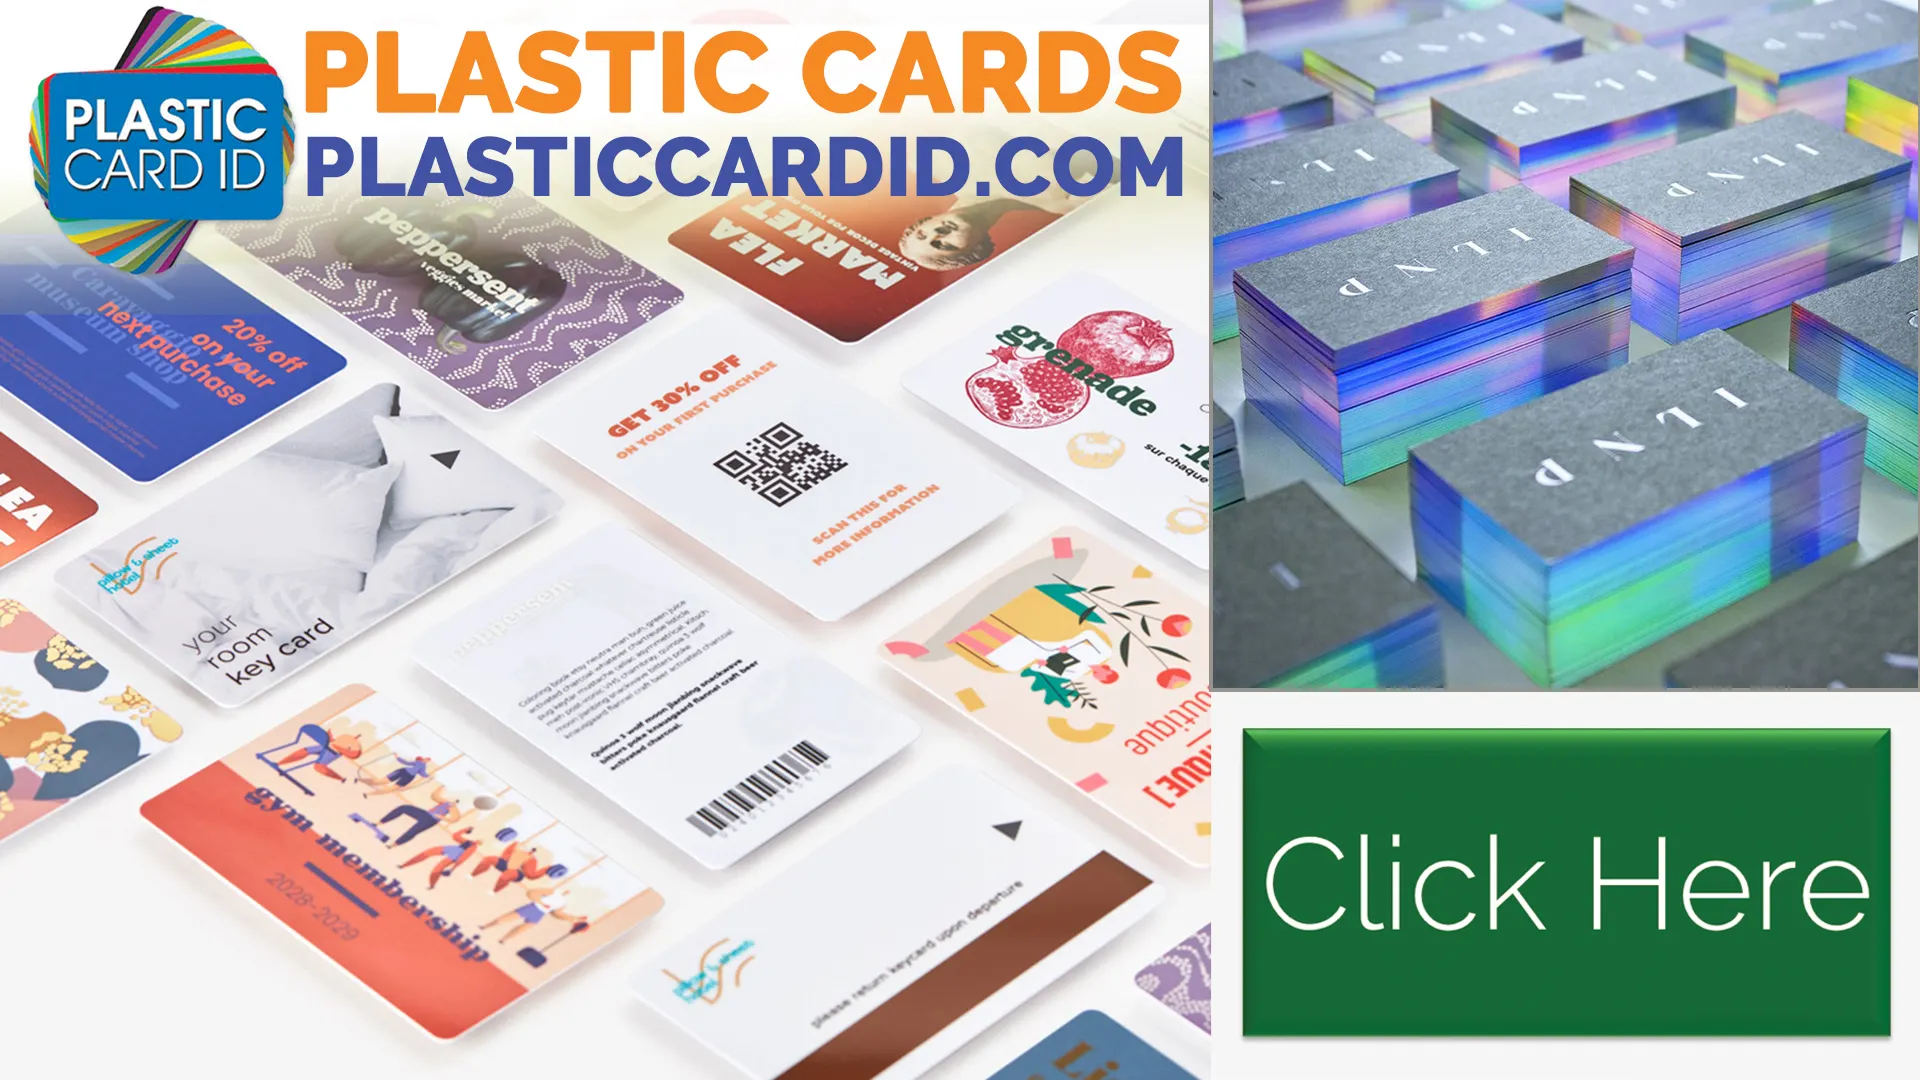 Welcome to Plastic Card ID




: Turning Feedback Into Finesse